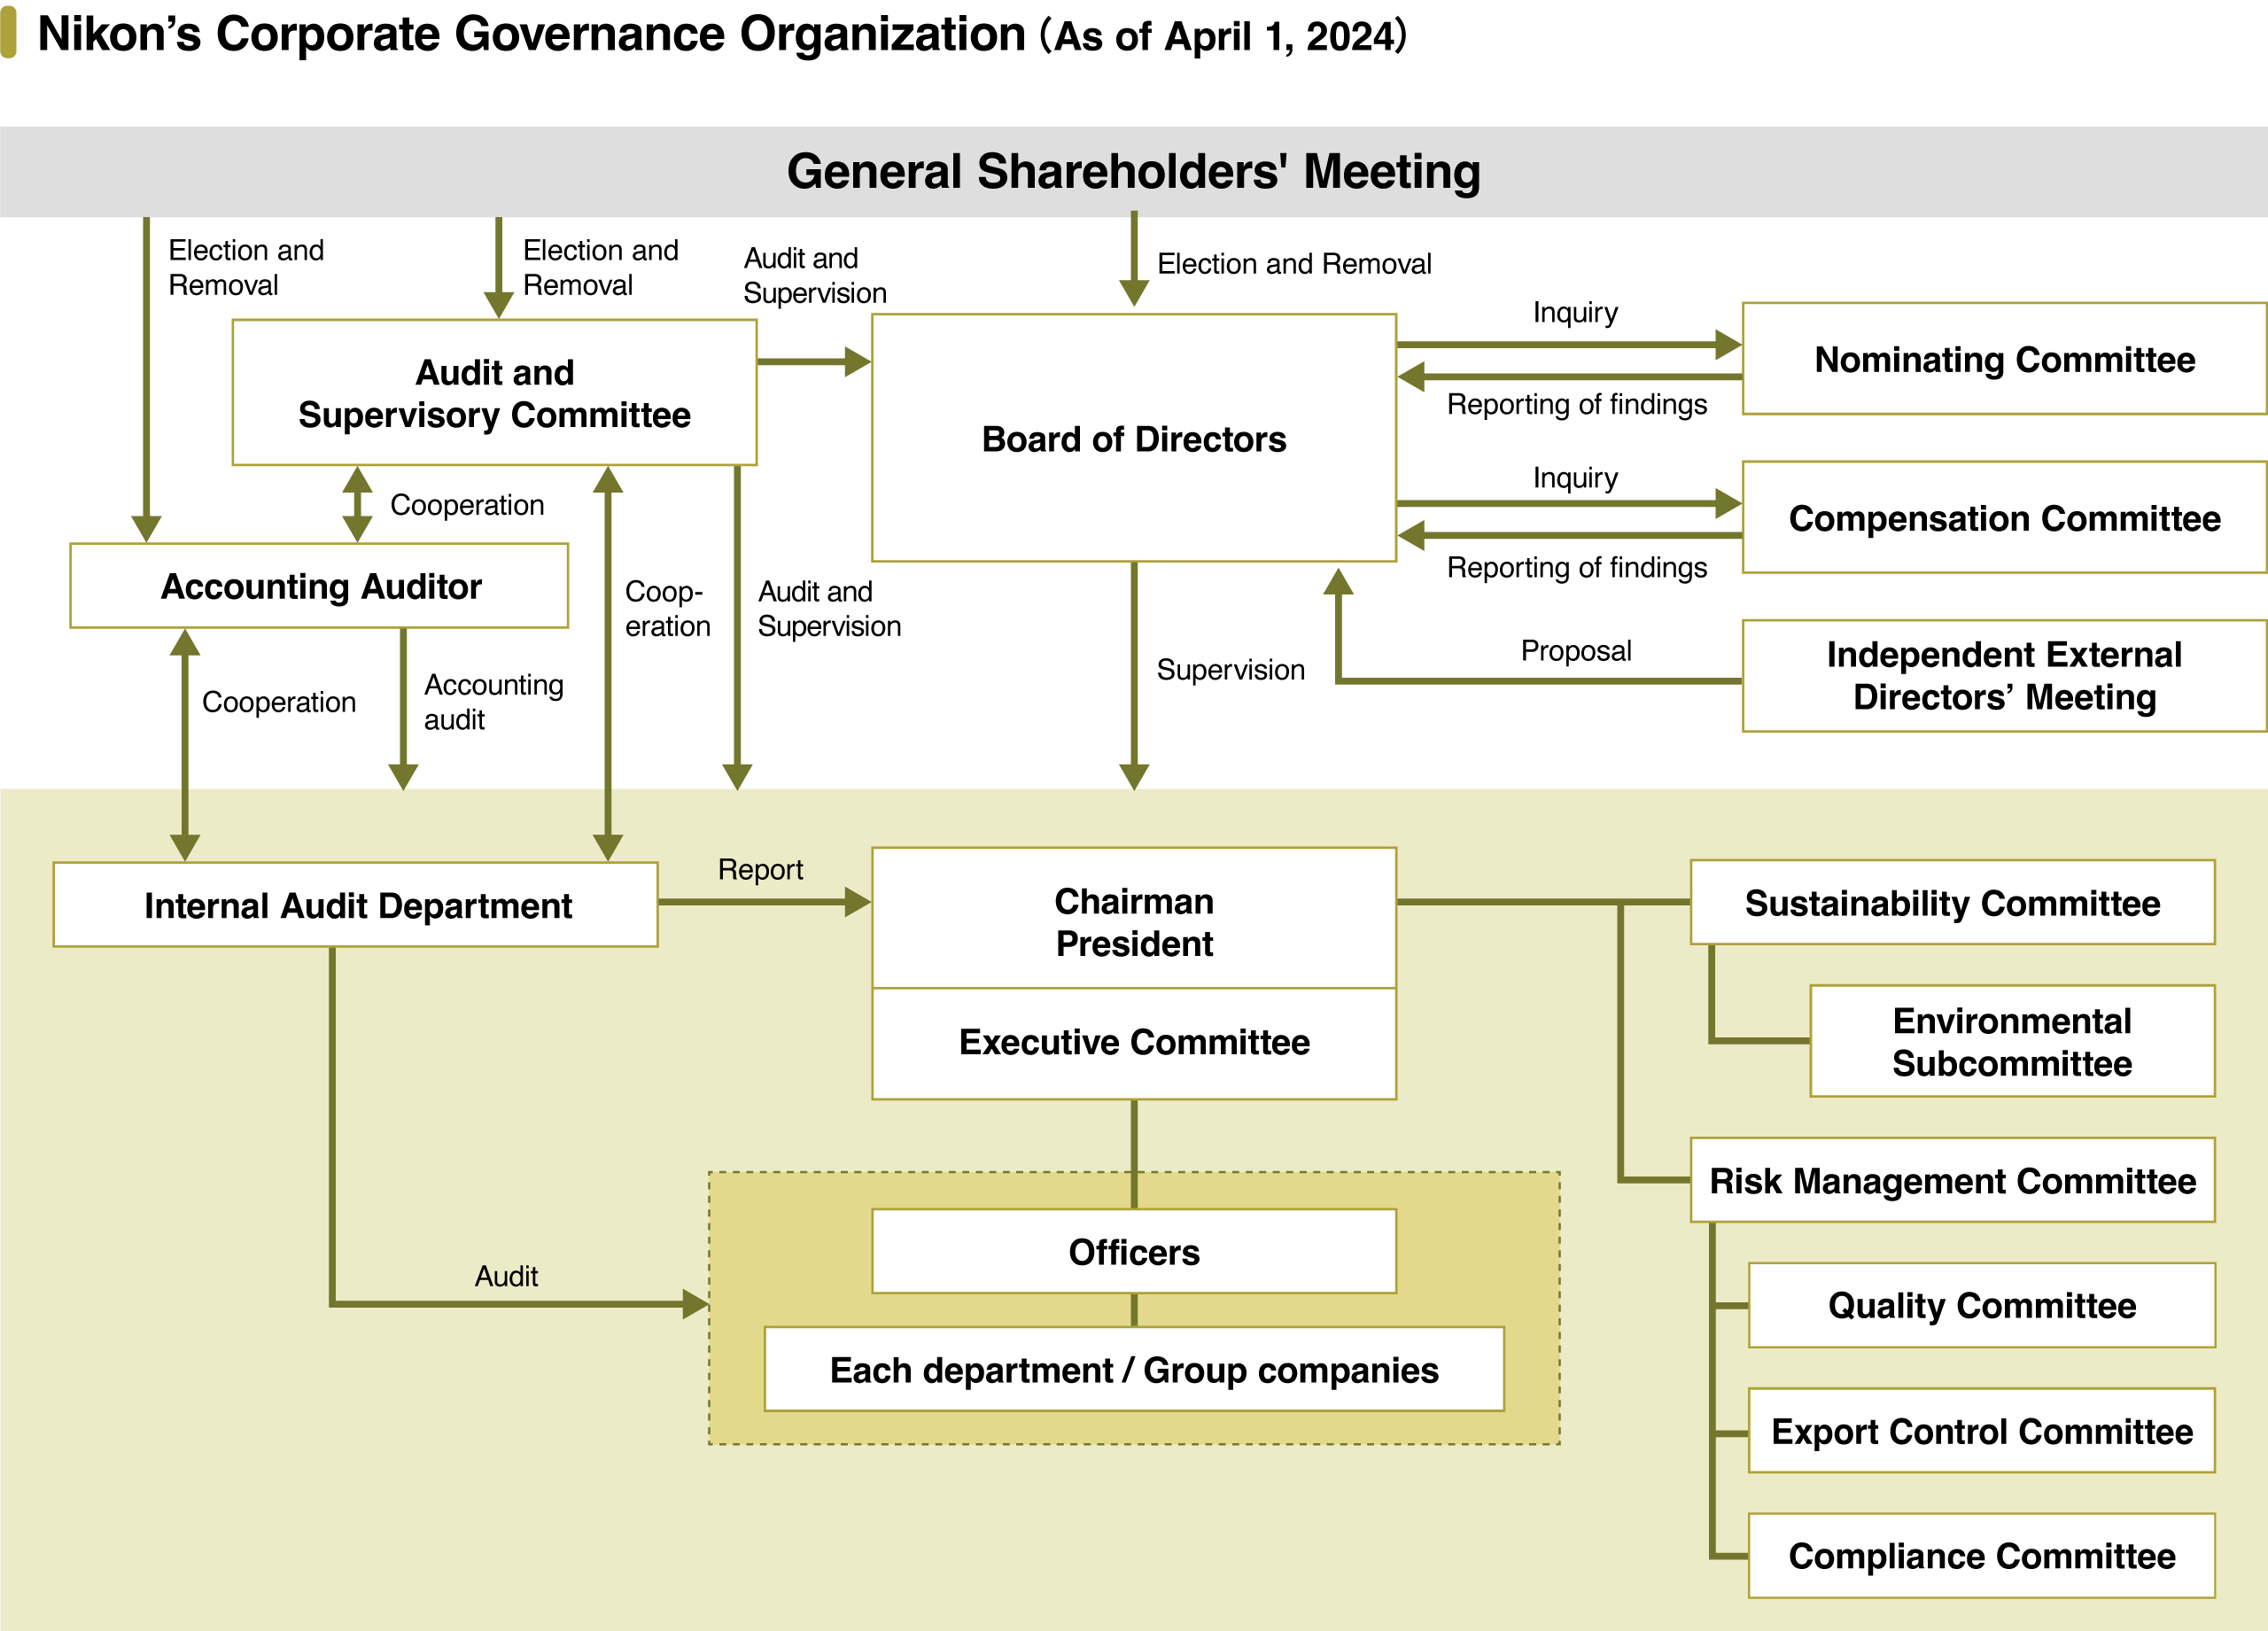 Nikon's Corporate Governance Organization System (As of June 29, 2023): The General Shareholders' Meeting elects and removes directors, Audit and Supervisory Committee members, and the Accounting Auditor. The Board of Directors submits inquiries to the Nominating Committee and the Compensation Committee, and they report their findings to the Board of Directors. The Independent External Directors' Meeting submits proposals to the Board of Directors. The Board of Directors also supervises the Executive Committee and various other committees etc., including the Sustainability Committee. The Audit and Supervisory Committee audits and supervises the Board of Directors, the Executive Committee and various other committees etc., including the Sustainability Committee, and cooperates with the Accounting Auditor and the Internal Audit Department. The Accounting Auditor audits the Executive Committee and various other committees etc., including the Sustainability Committee, and cooperates with the Internal Audit Department. The Internal Audit Department reports to the President and Executive Committee, and audits officers and departments/group companies. The Sustainability Committee and the Risk Management Committee are under the control of the President, and the Environmental Subcommittee is under the control of the Sustainability Committee. The Quality Committee, Export Control Committee and Compliance Committee are under the control of the Risk Management Committee.